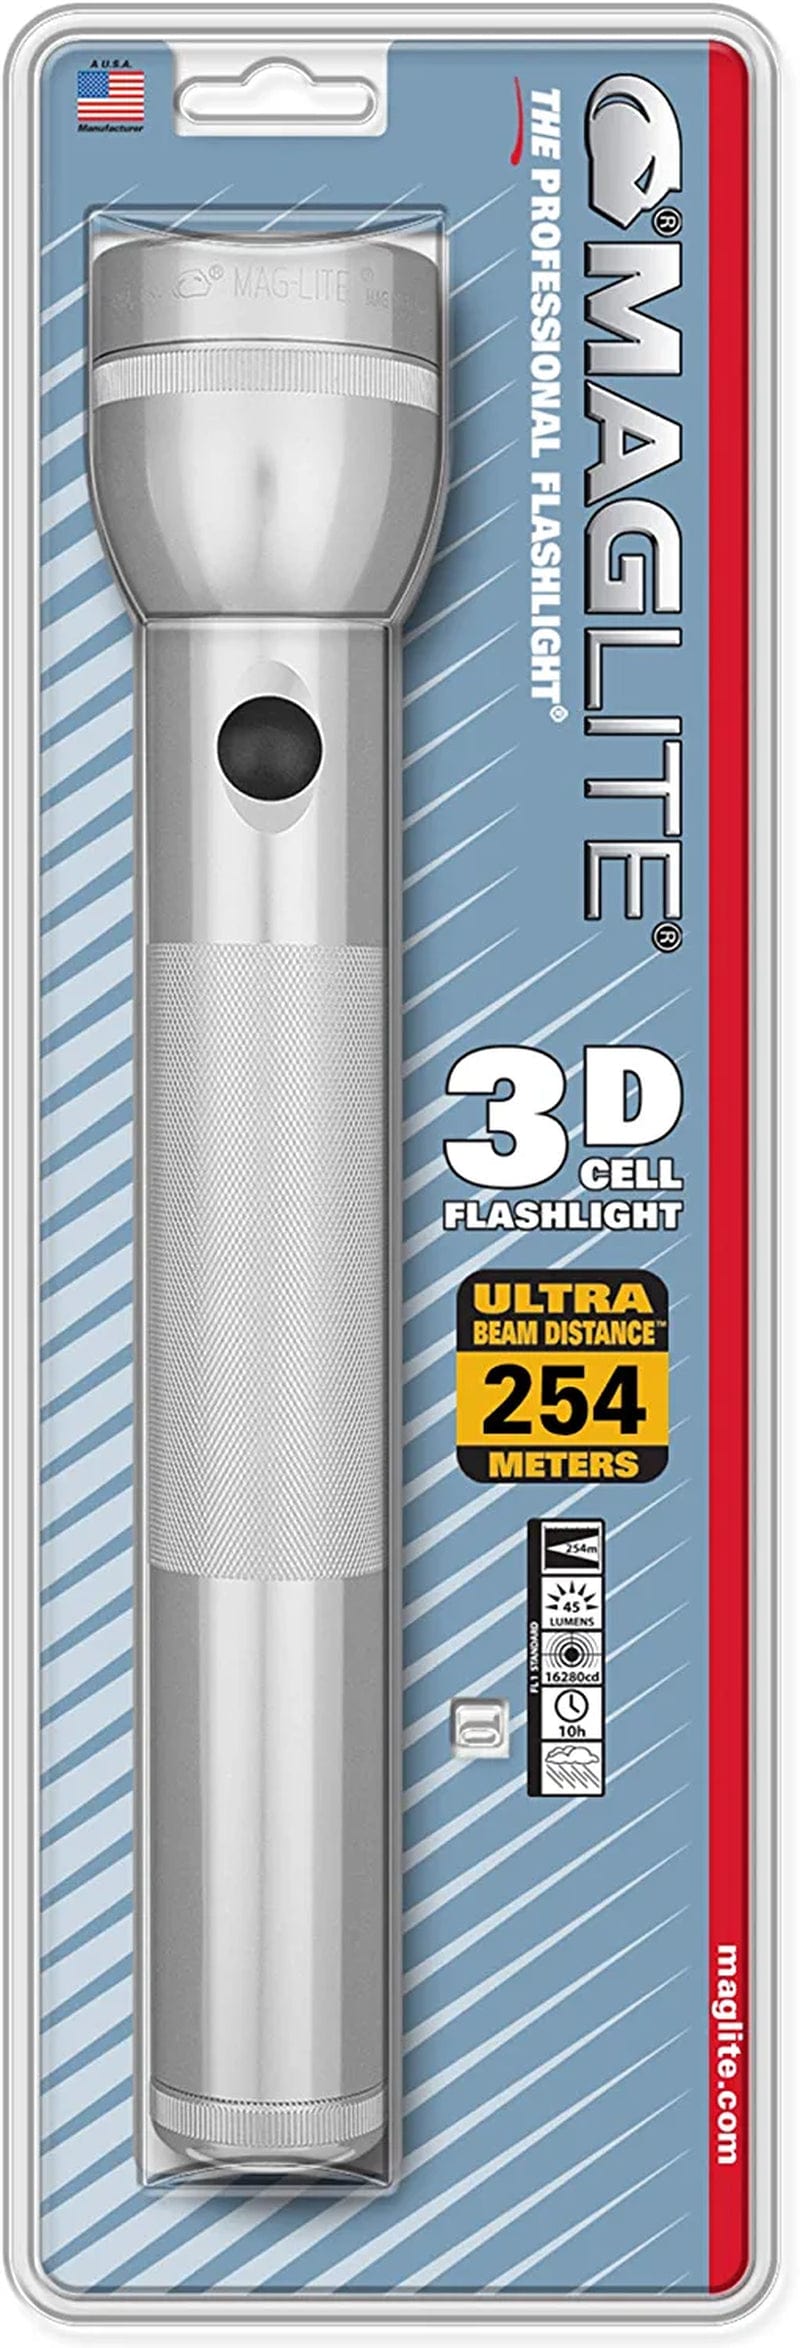 Maglite Heavy-Duty Incandescent 3-Cell D Flashlight in Display Box, Blue -S3D115 Hardware > Tools > Flashlights & Headlamps > Flashlights MAGLITE Silver Flashlight 3 Cell in Blister Pack